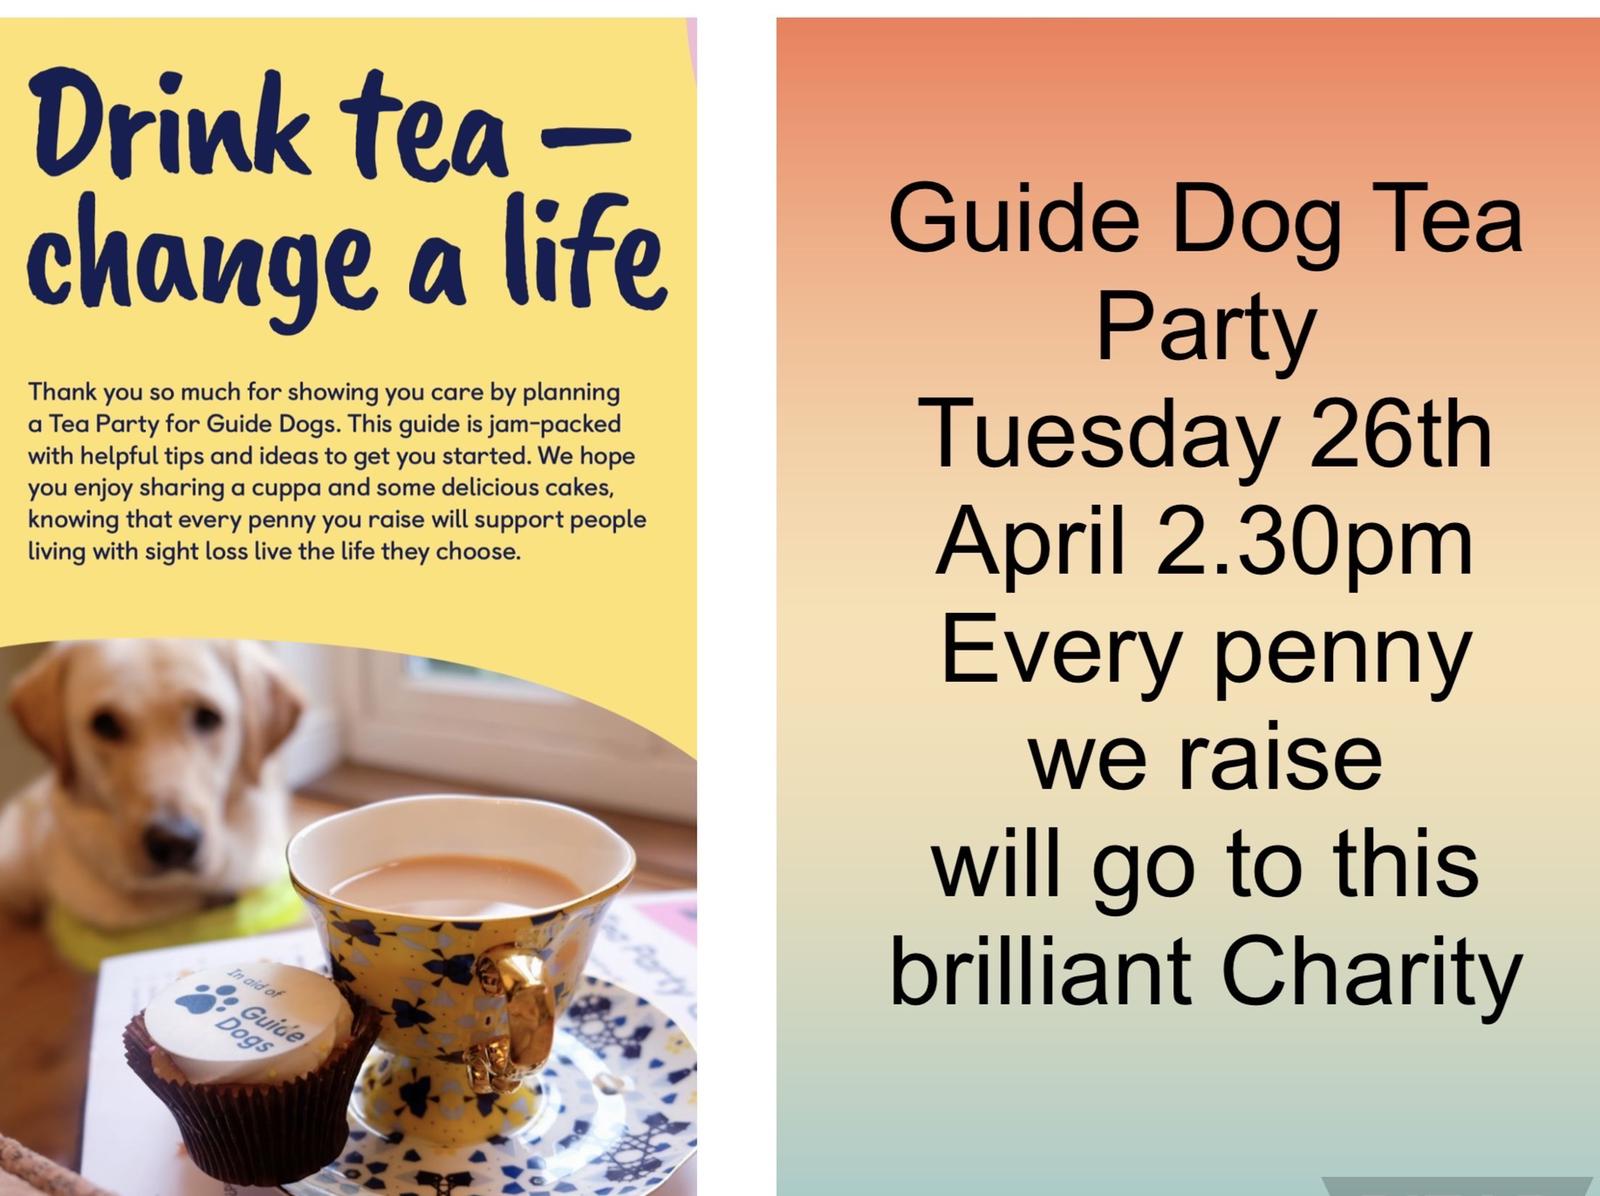 Guide Dog Tea Party